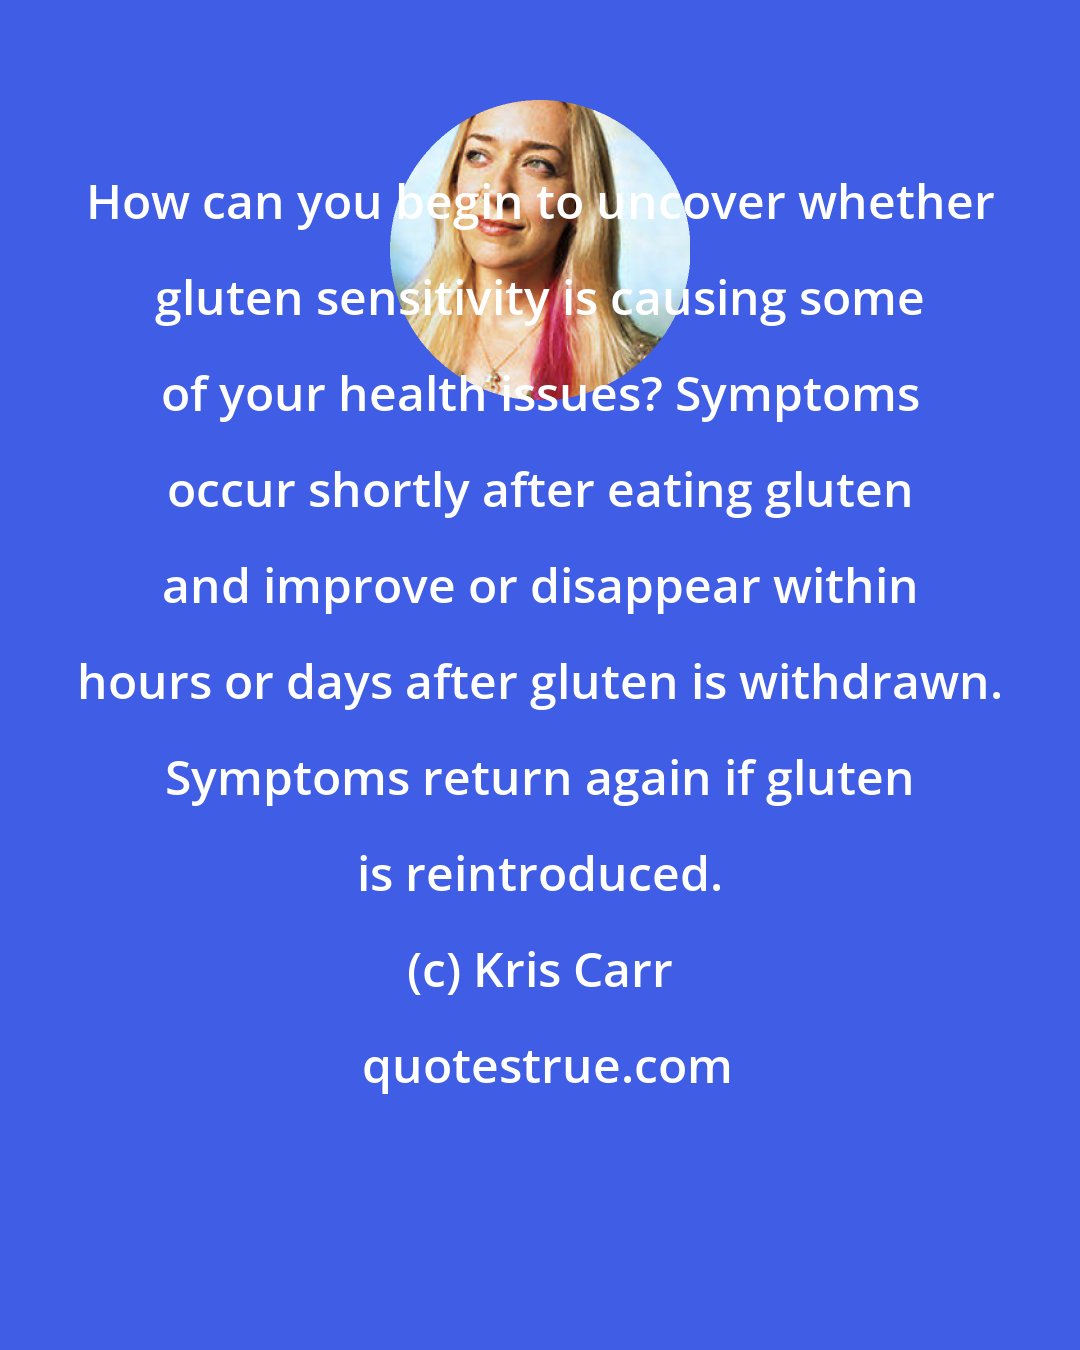 Kris Carr: How can you begin to uncover whether gluten sensitivity is causing some of your health issues? Symptoms occur shortly after eating gluten and improve or disappear within hours or days after gluten is withdrawn. Symptoms return again if gluten is reintroduced.